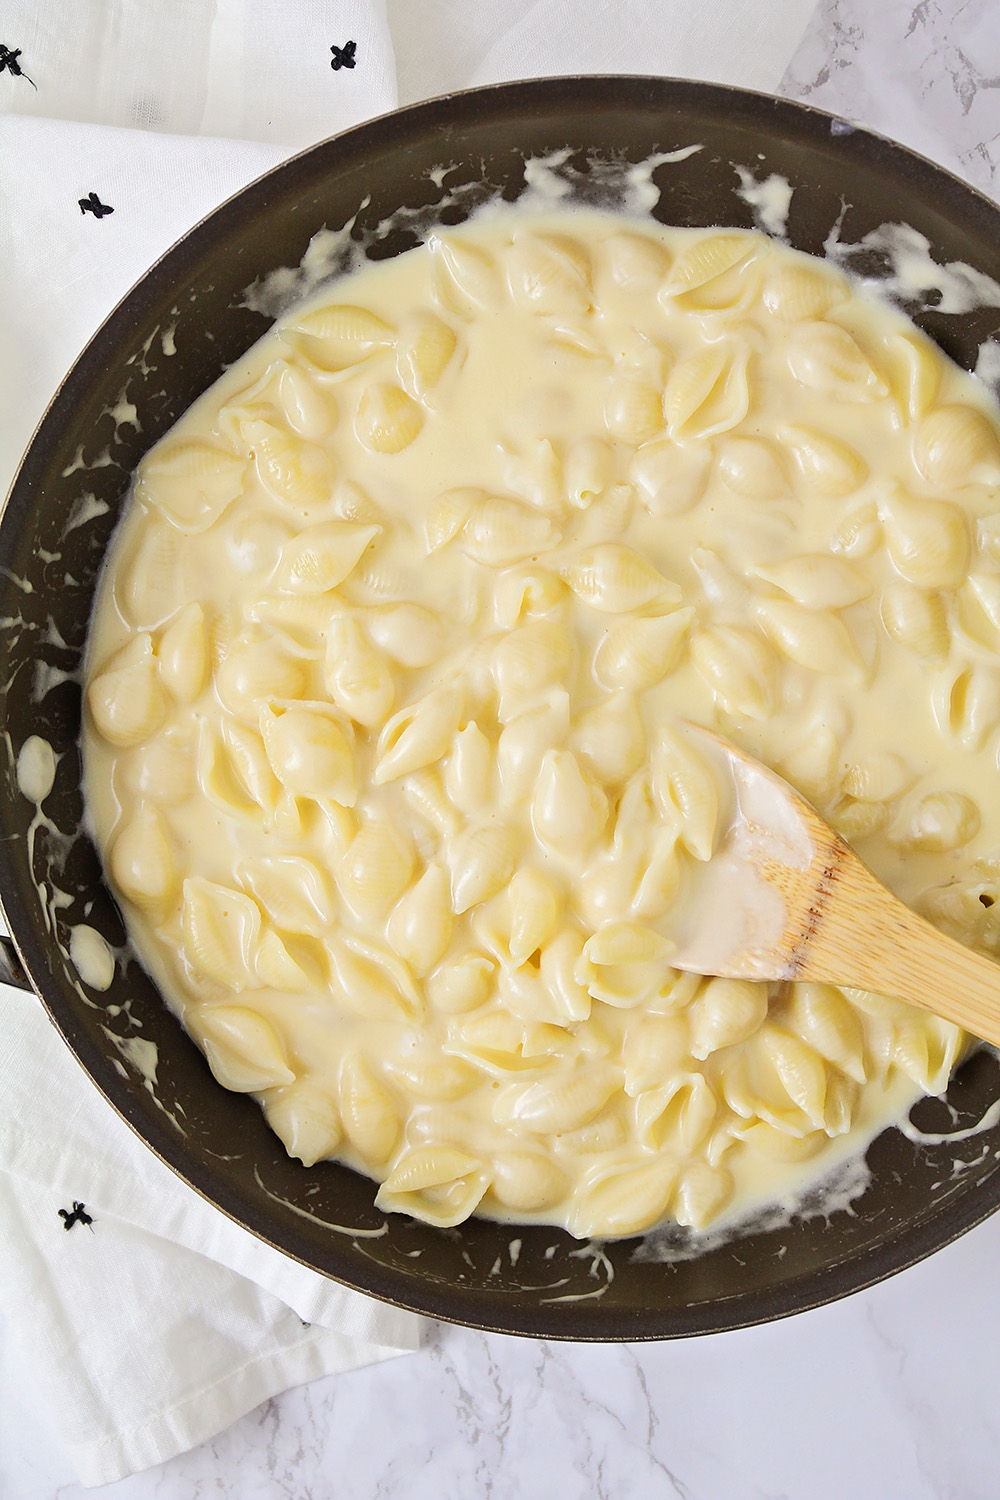 This stovetop mac and cheese is so creamy, cheesy, and all around delicious!